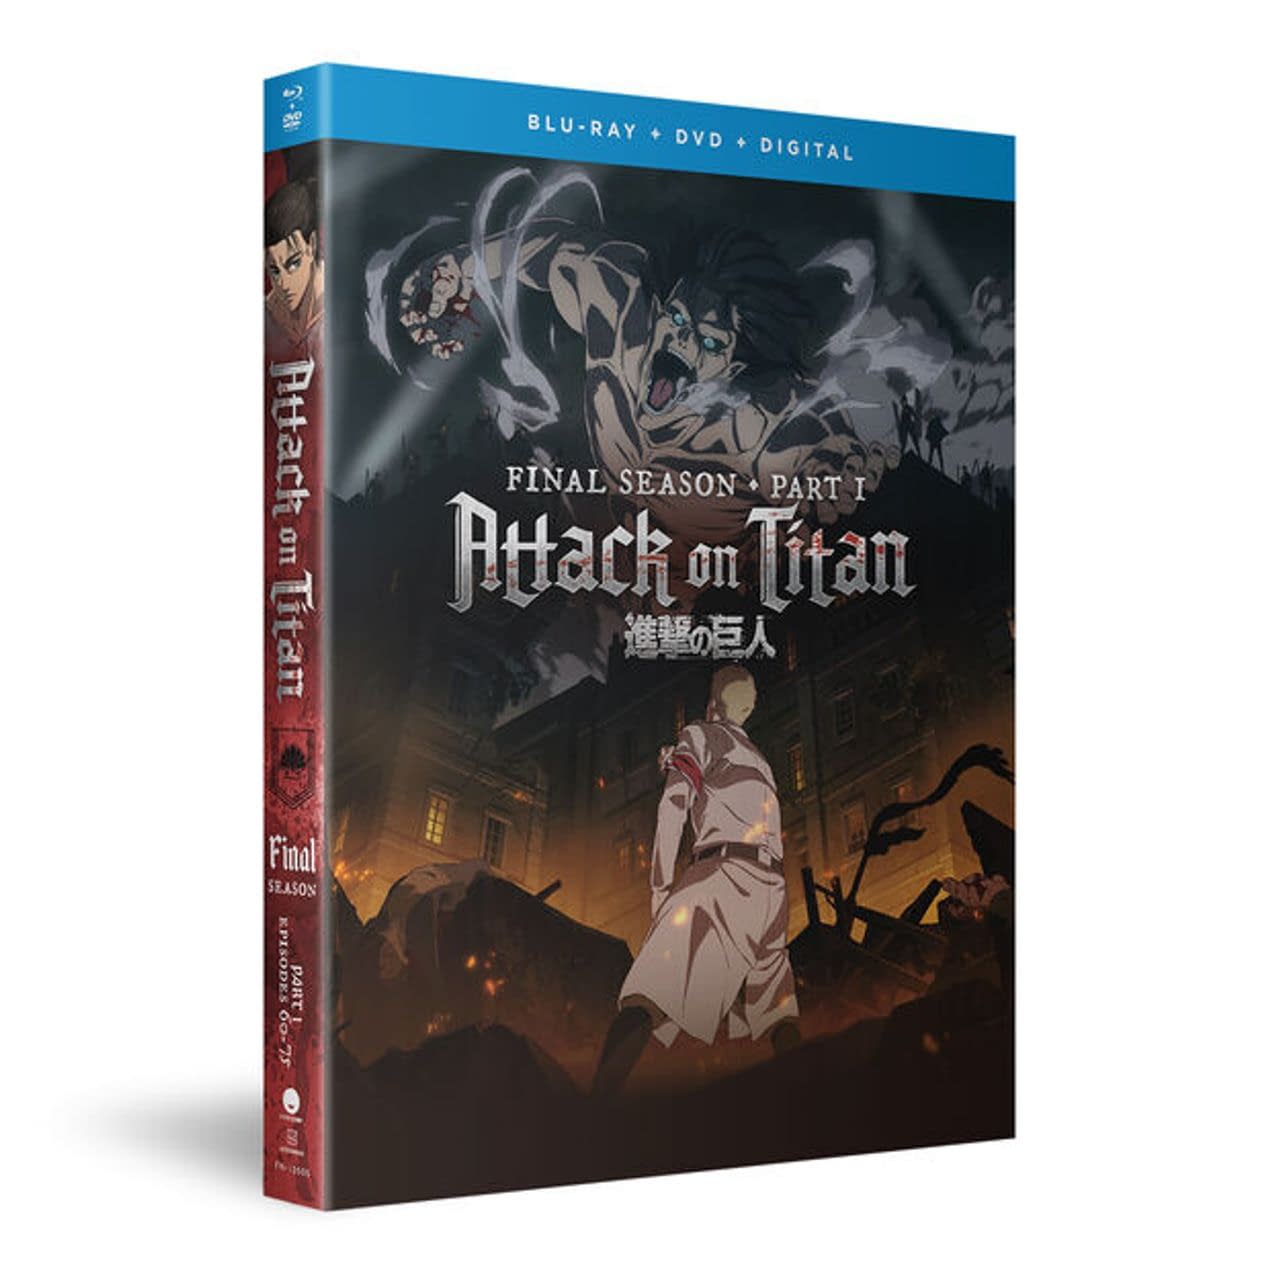 Attack on Titan, Part 2 (Standard Edition Blu-ray/DVD Combo)